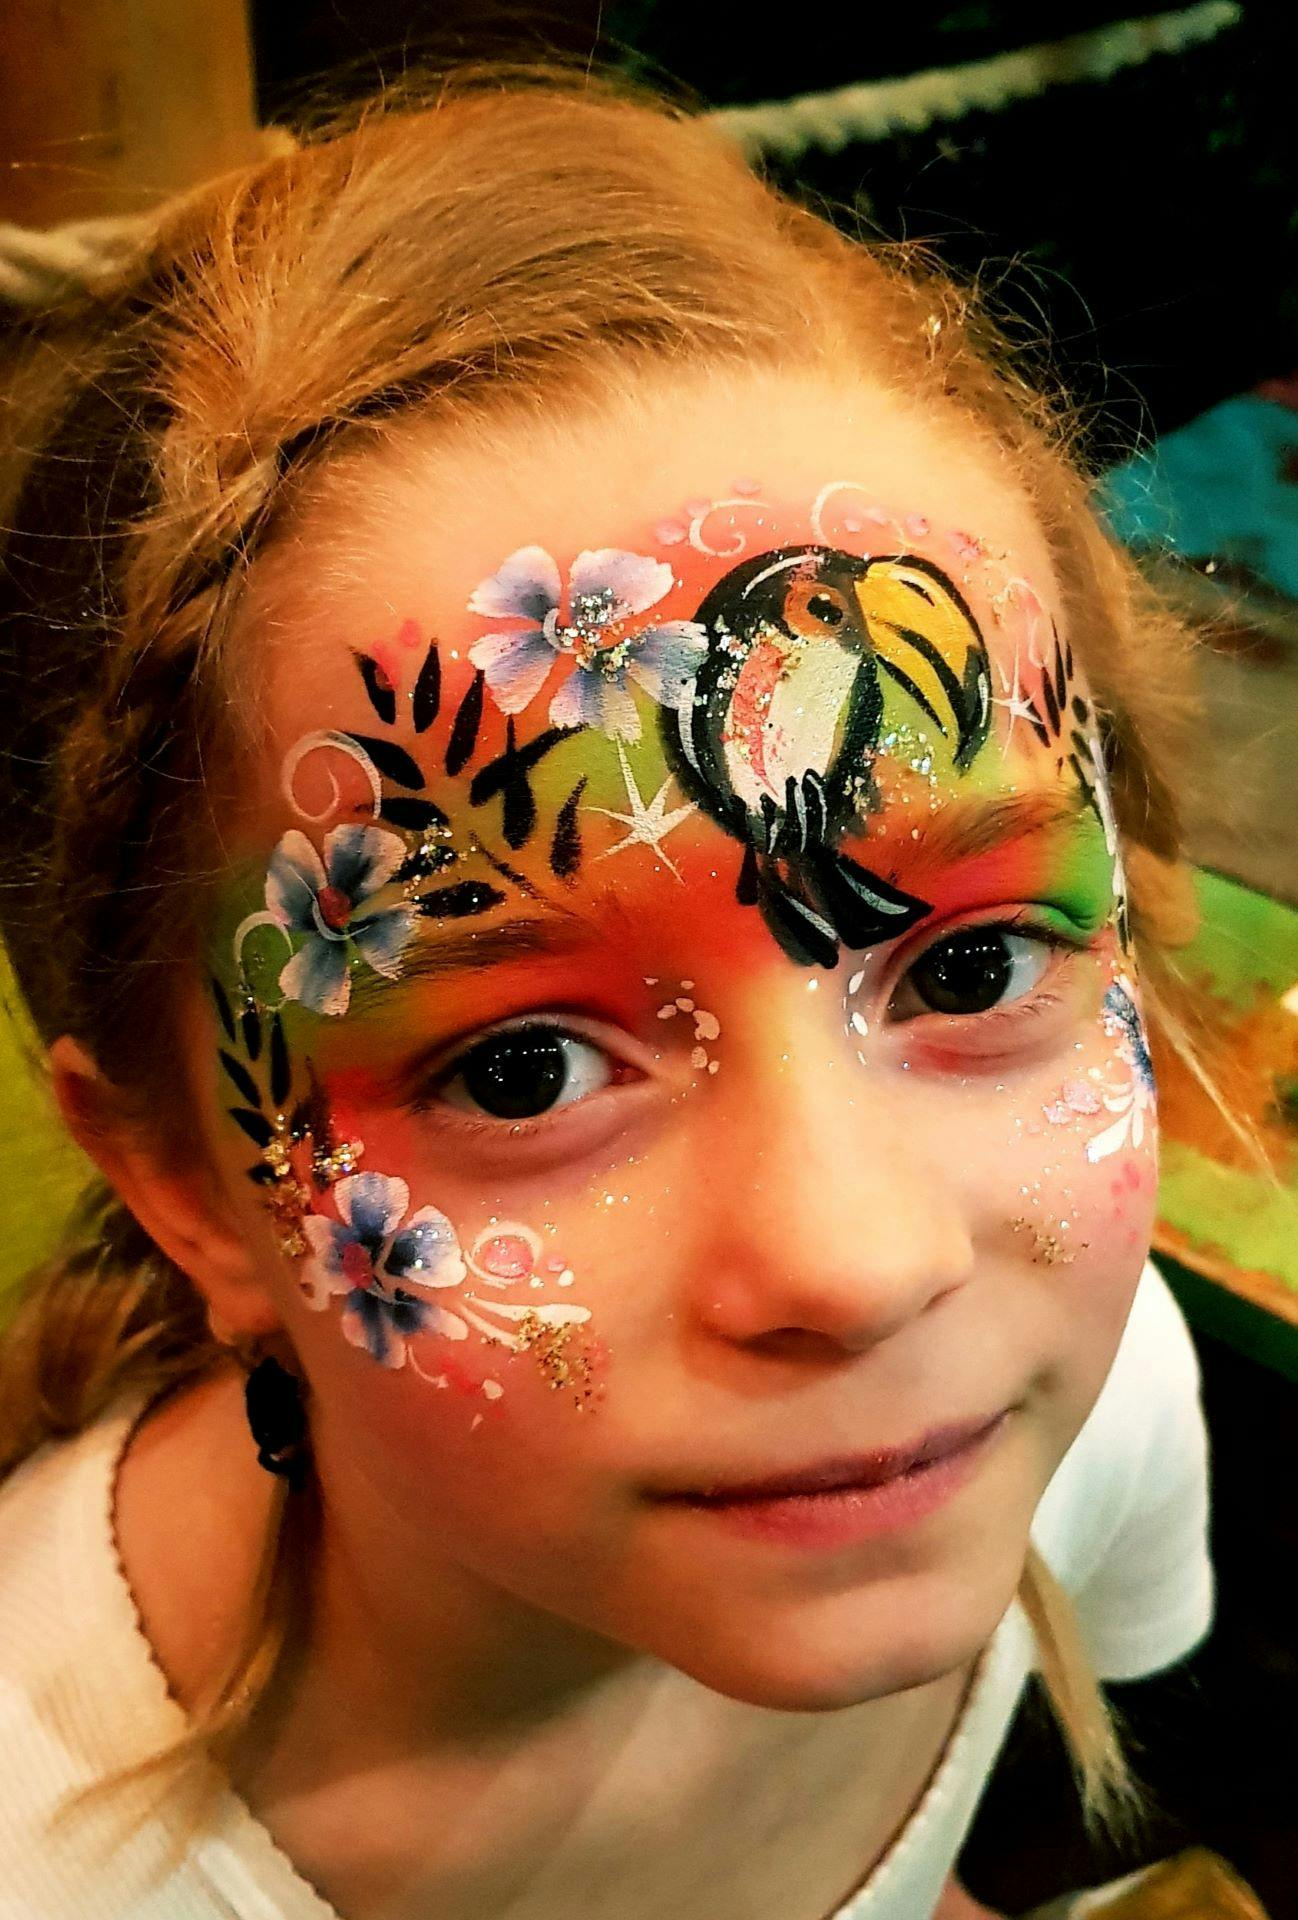 A young child posing with her face painted.